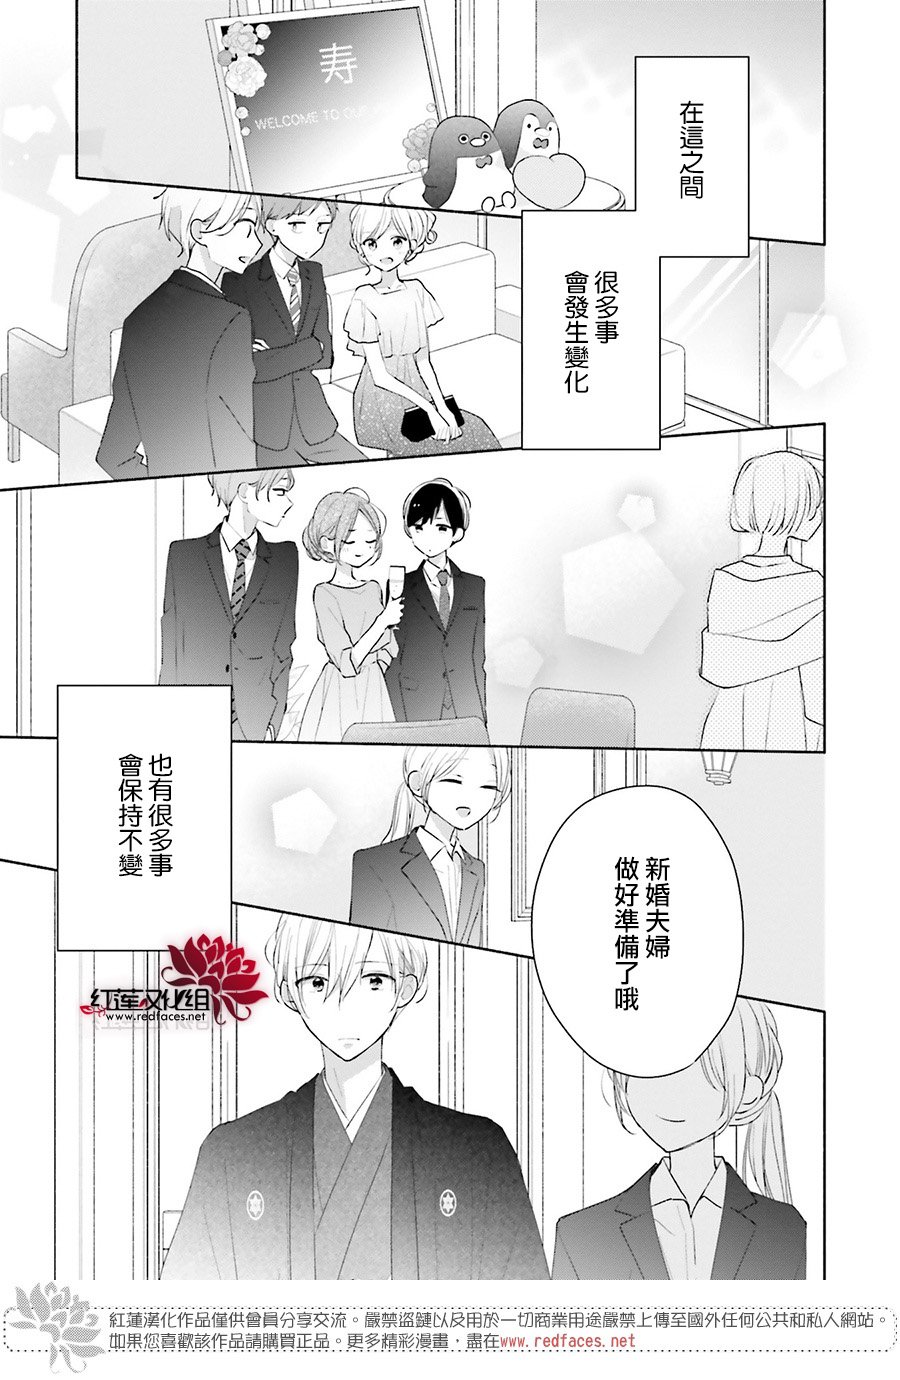 If given a second chance - 第46話(2/2) - 4